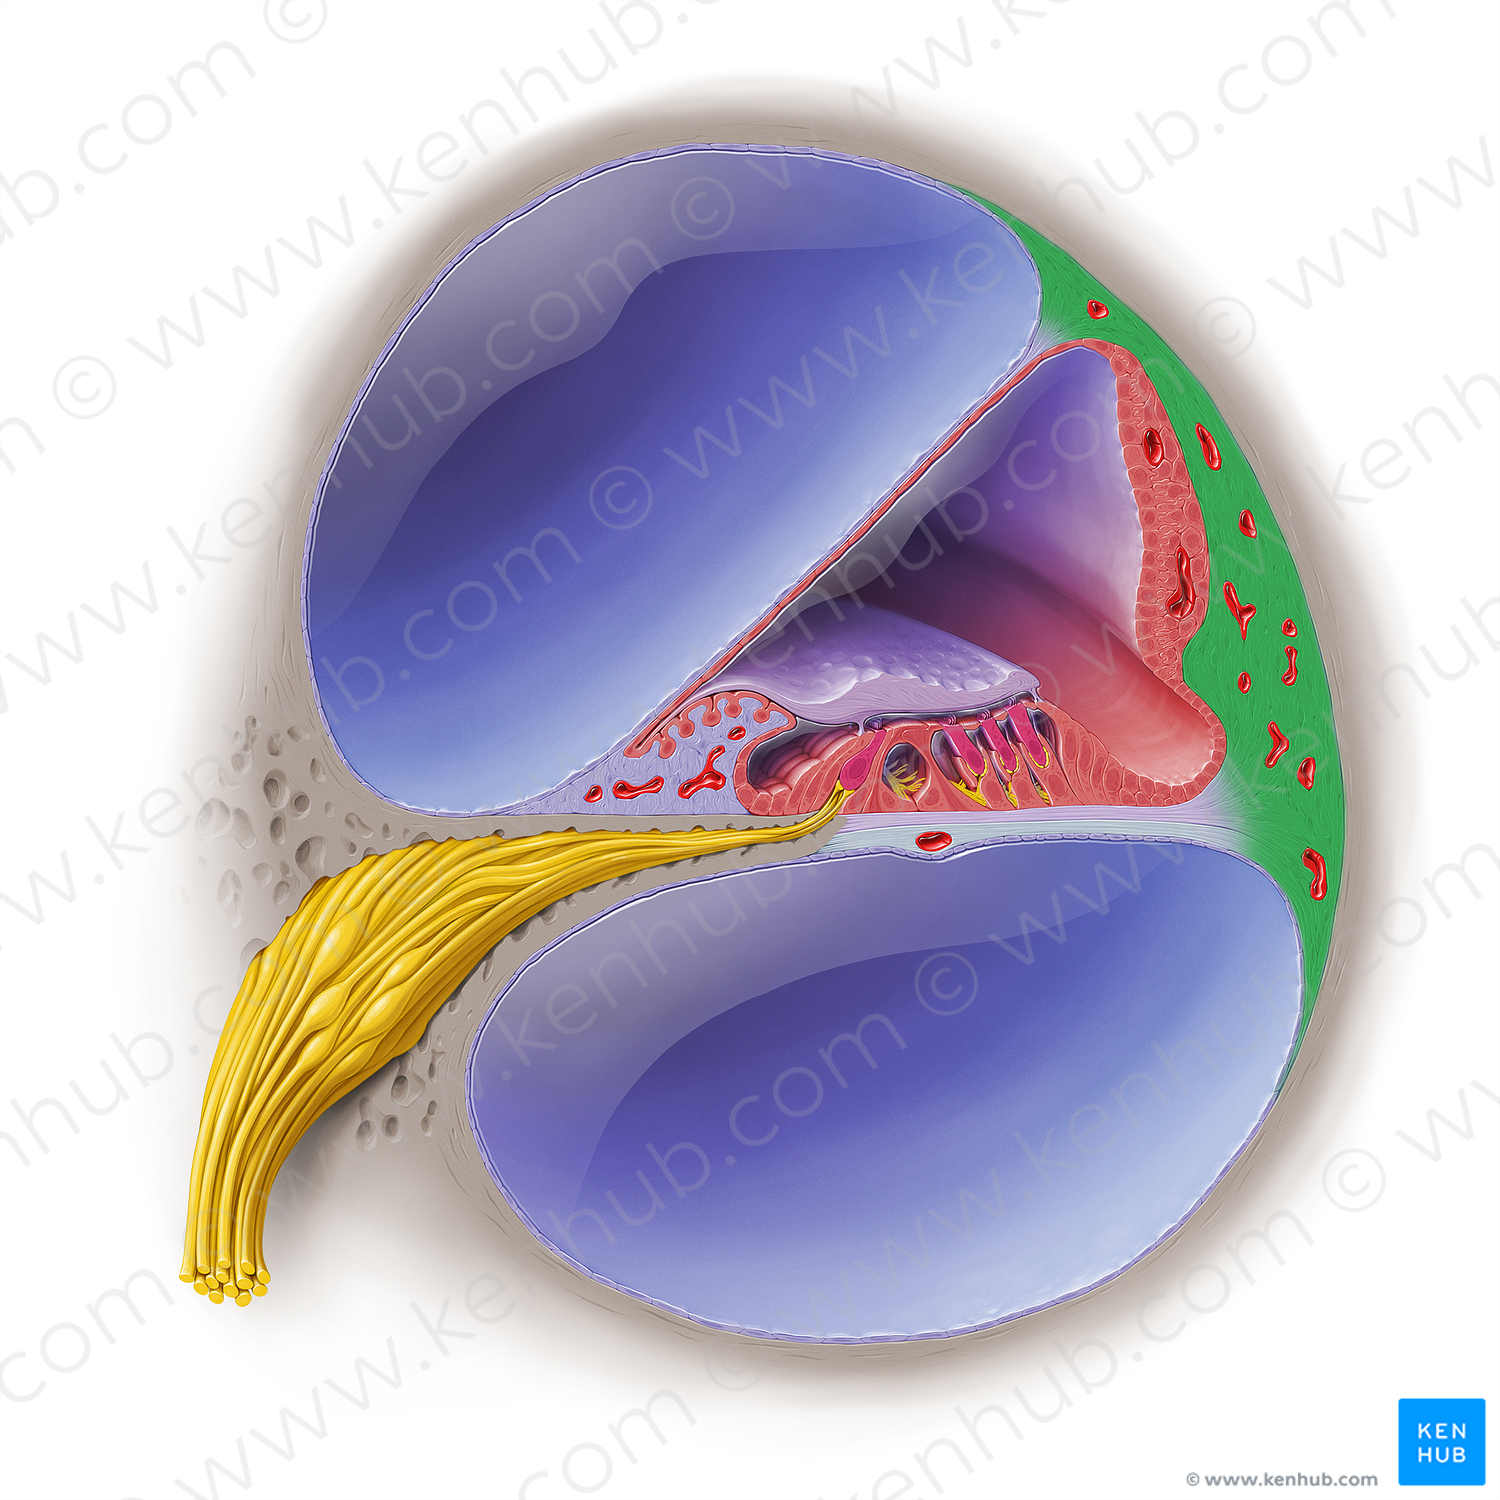 Spiral ligament of cochlear duct (#19043)